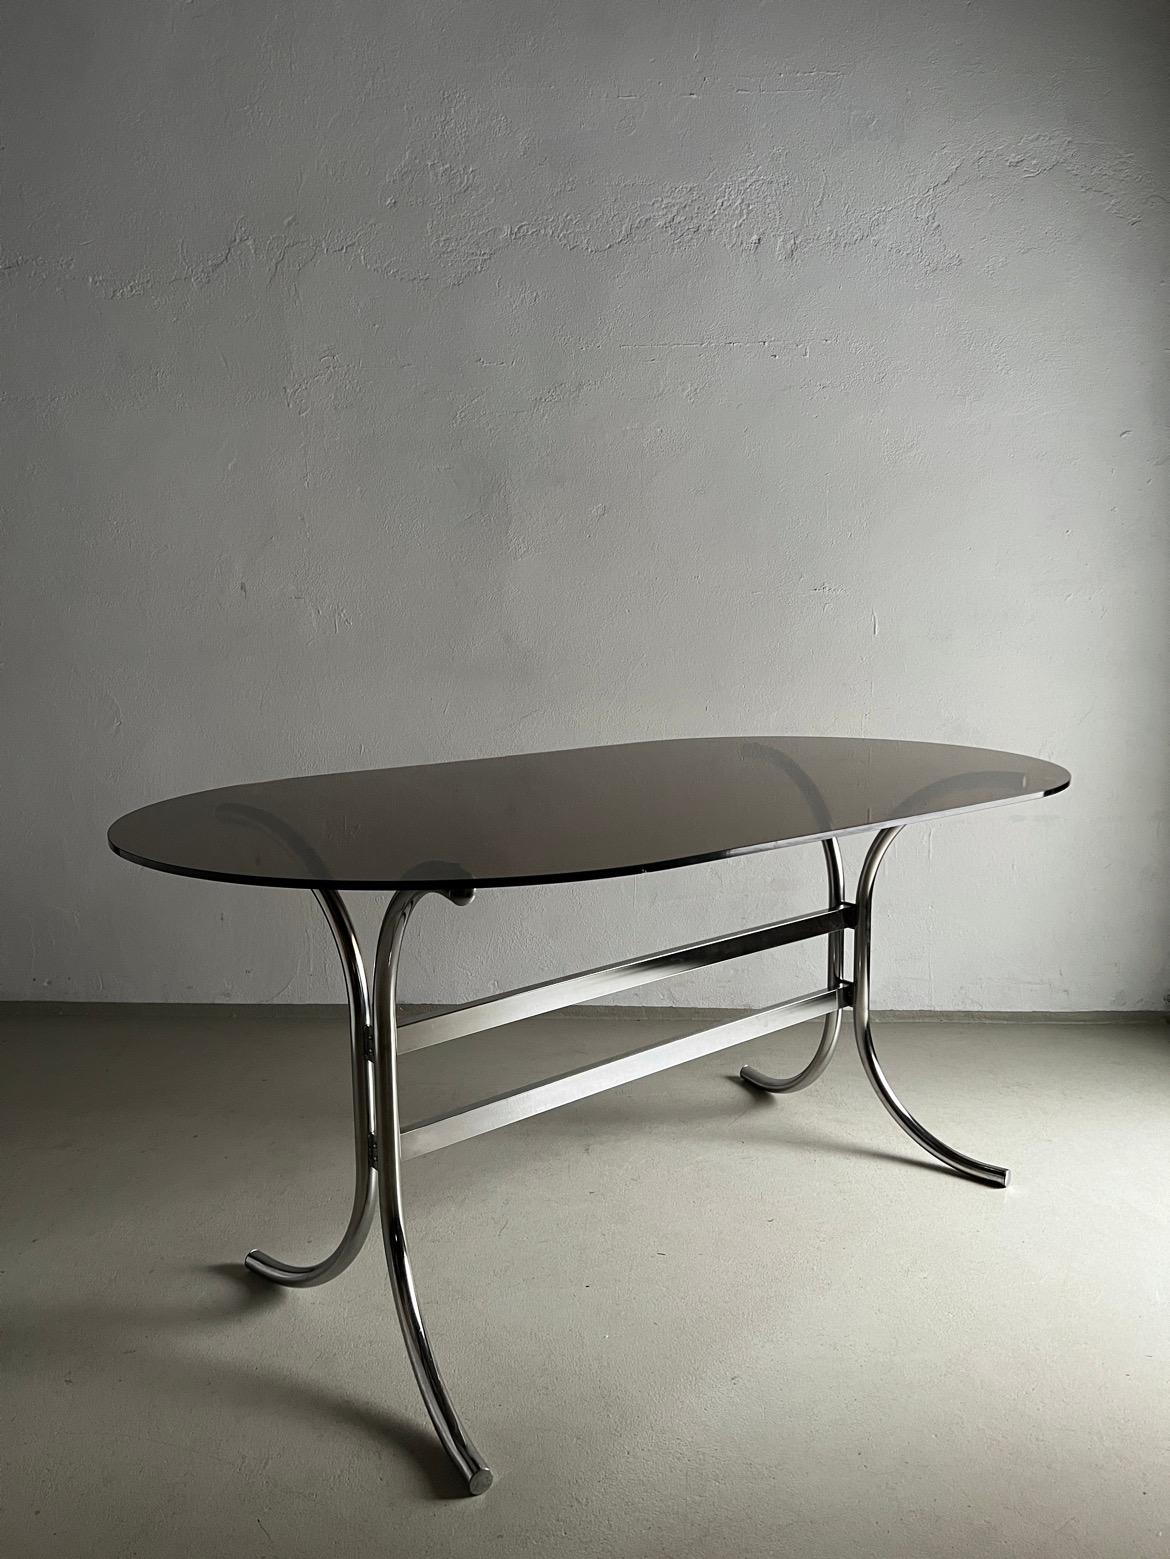 Minimalist Chrome Smoked Glass Dining Table, Italy 1970s For Sale